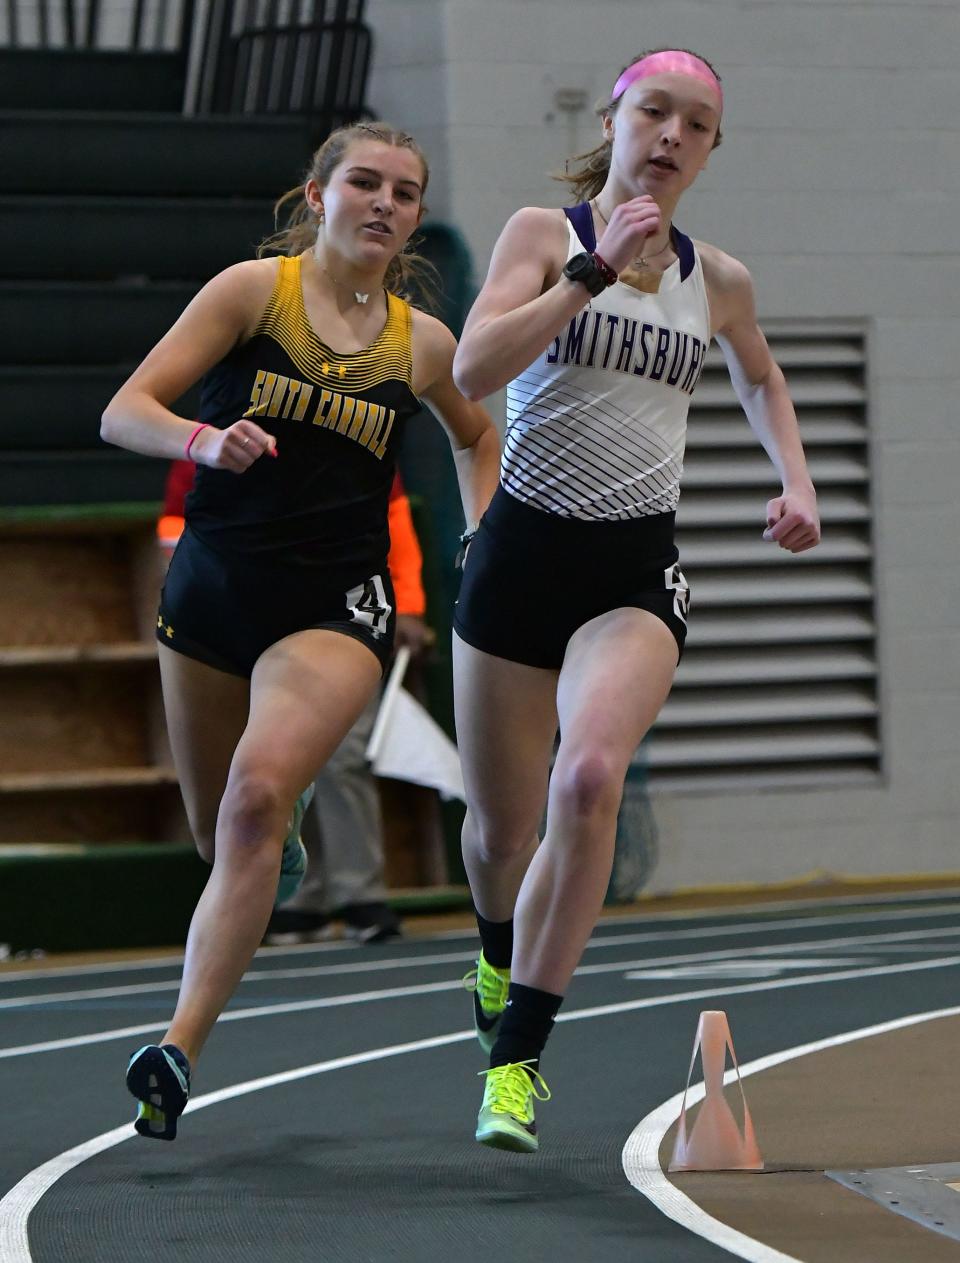 Smithsburg's Grace Ellis leads South Carroll's Lauren Chesney on her way to victory in the girls 500 at the Maryland Class 1A West Indoor Track & Field Championships at Hagerstown Community College.